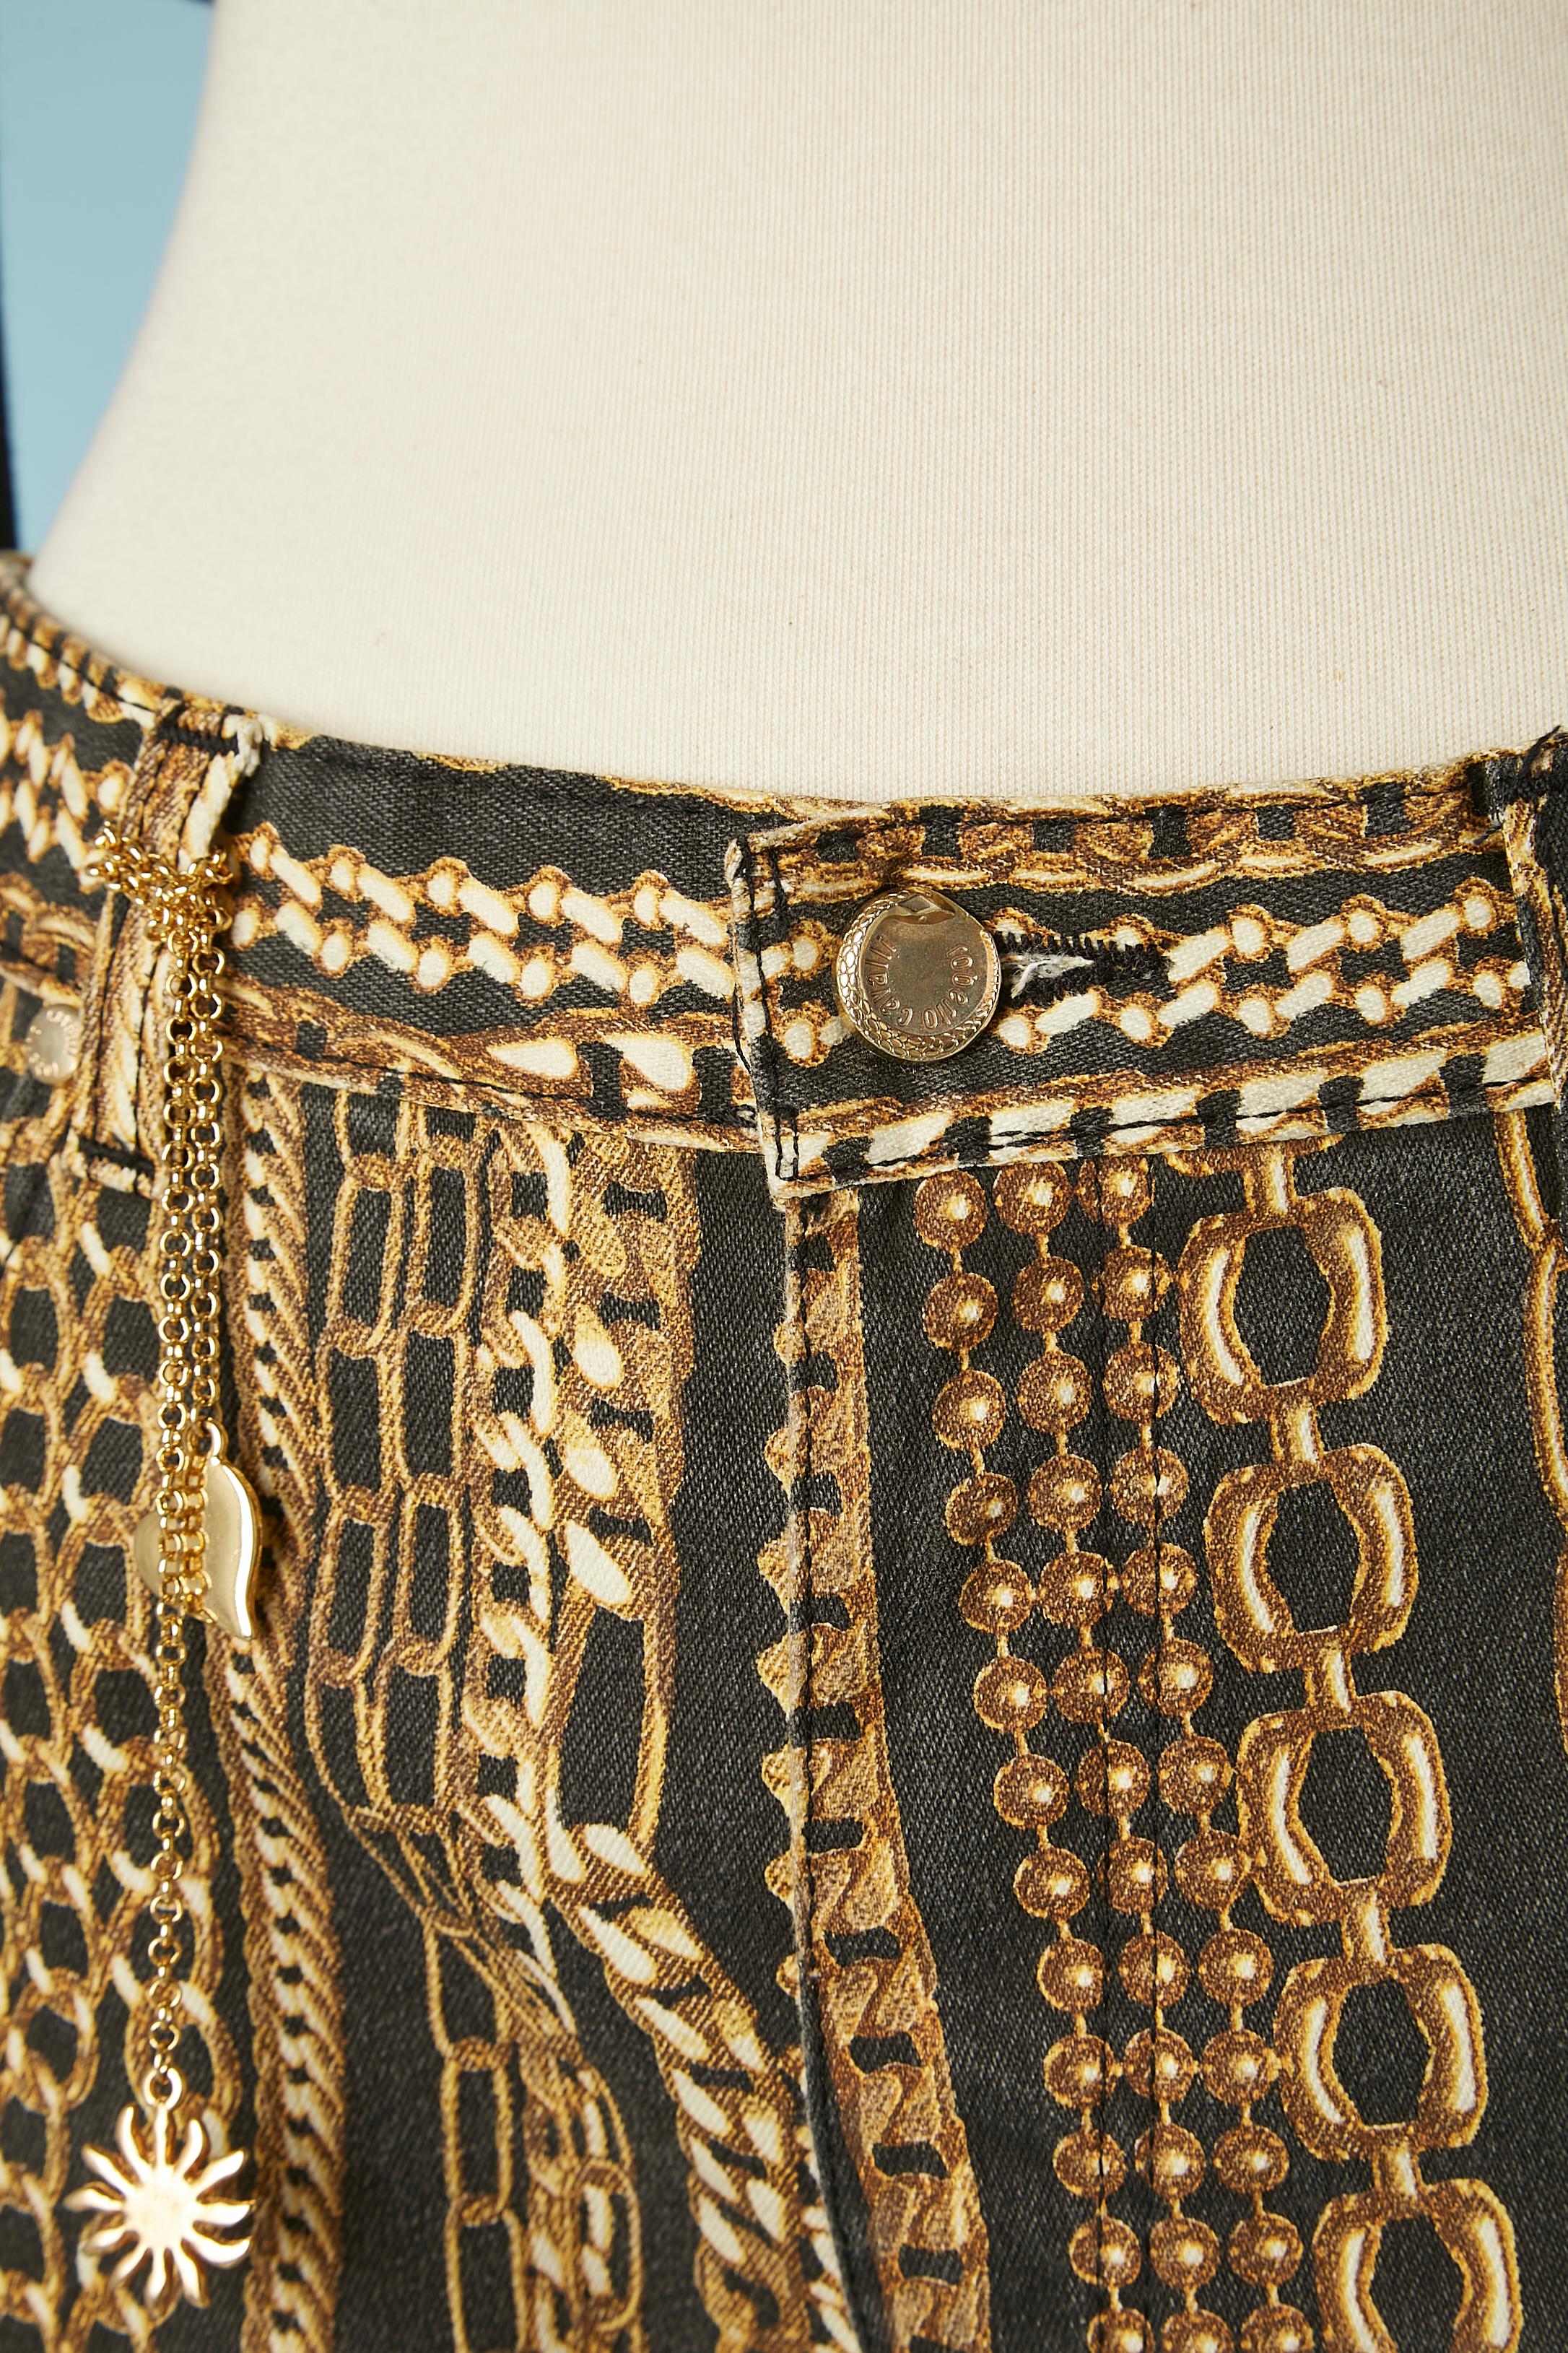 Sweater and printed trouser ensemble with gold metallic chains Roberto Cavalli  In Excellent Condition For Sale In Saint-Ouen-Sur-Seine, FR